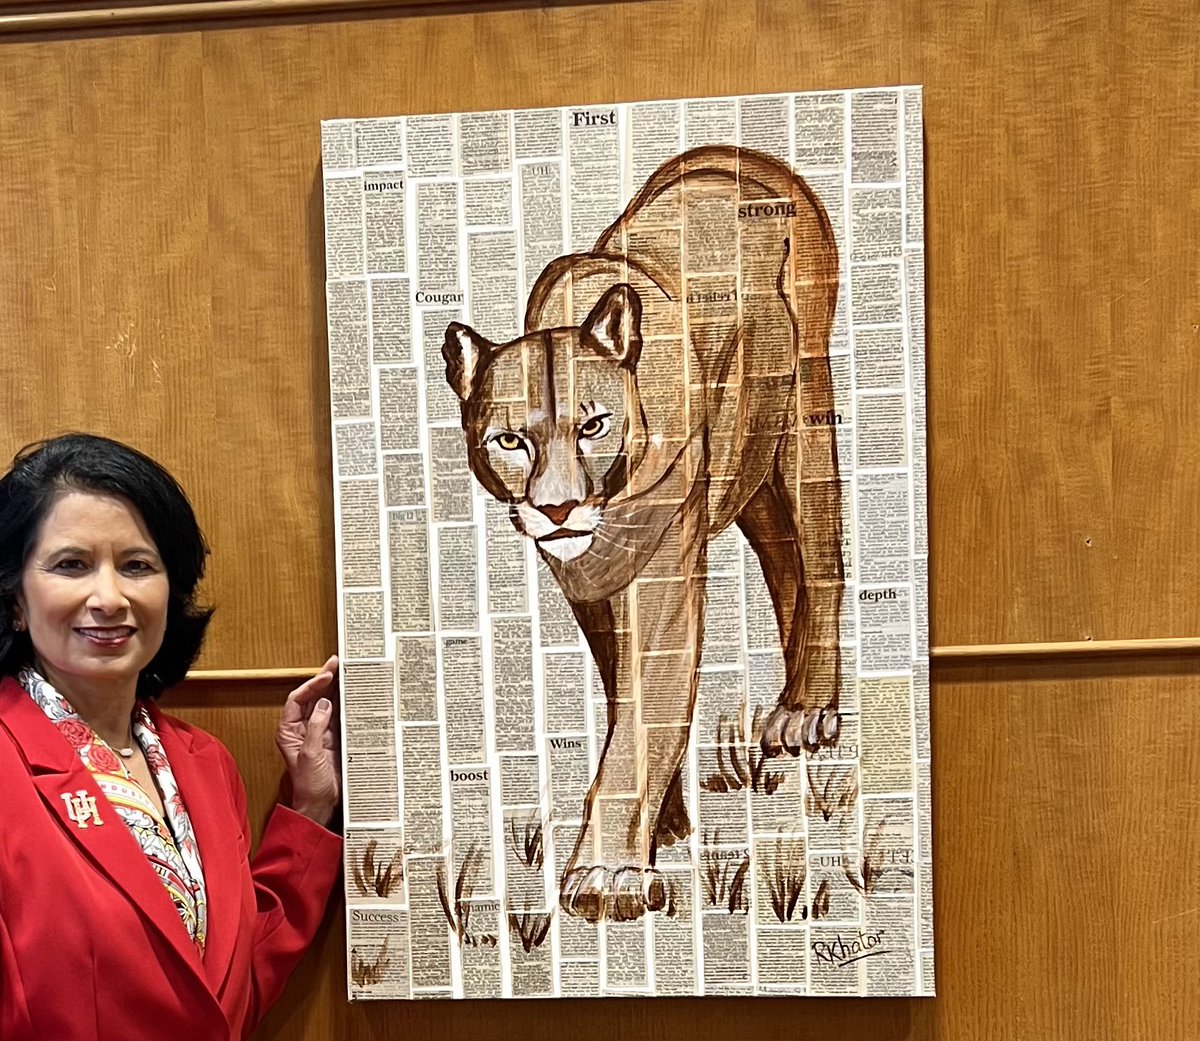 My latest painting… all stories in the background are about UH Cougars and bold letters are chosen to depict our character. Currently displayed in my office lobby. @UHCougars @UHouston